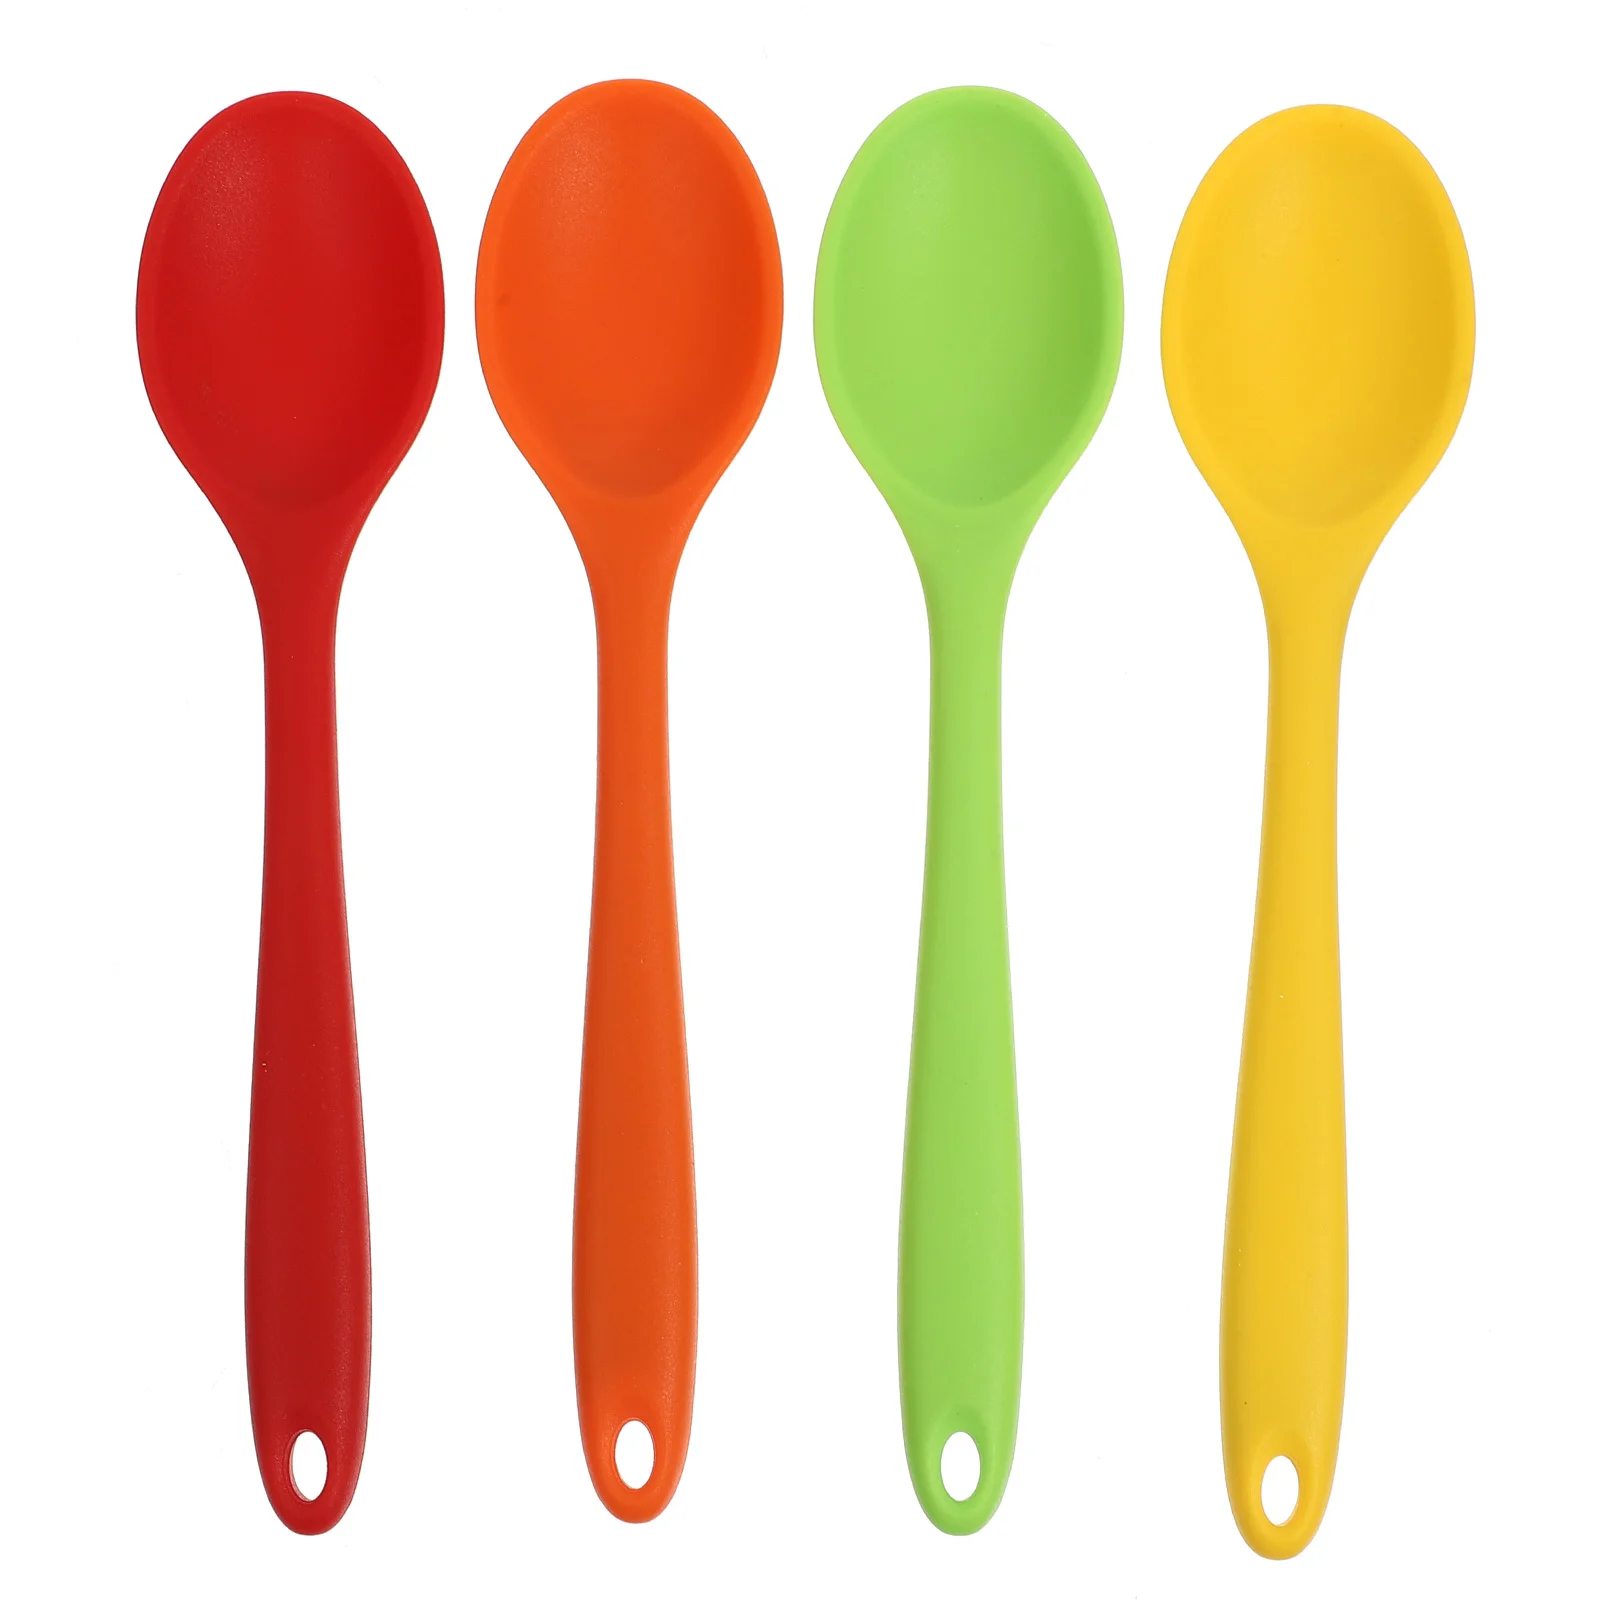 

4 Pcs Silicone Spoon Plastic Kitchen Utensils Supplies Soup Spoons Shell Cooking Silica Gel Multipurpose Child